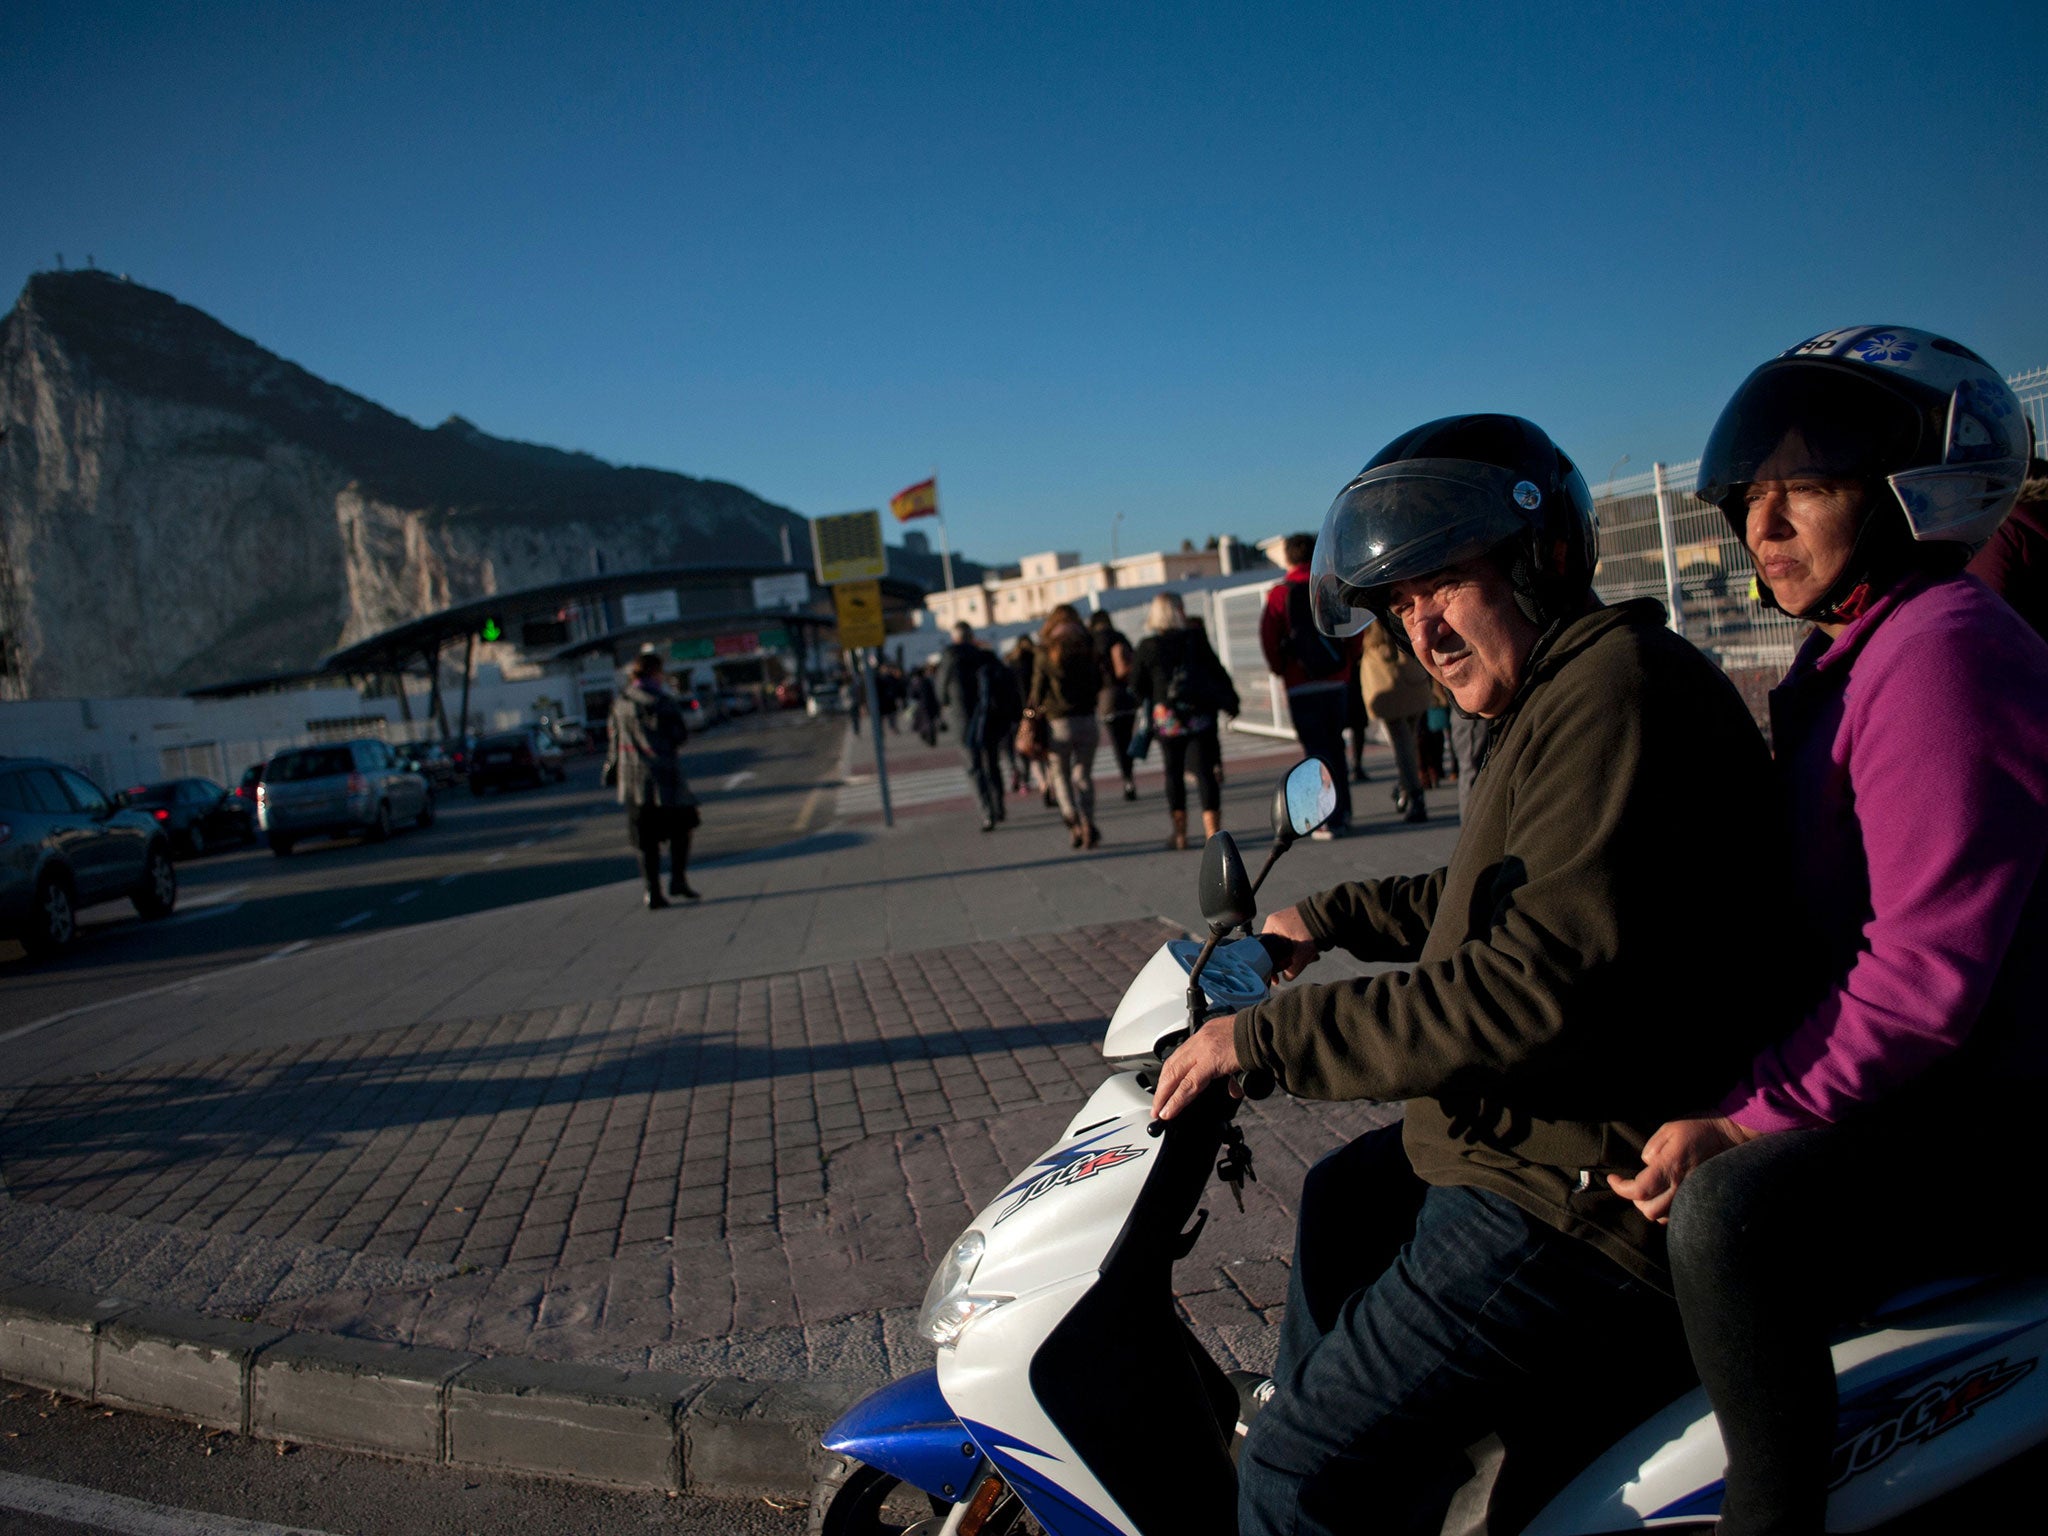 Gibraltar’s economy is dependent upon a workforce of around 10,000 people who cross through the frontier with Spain every day